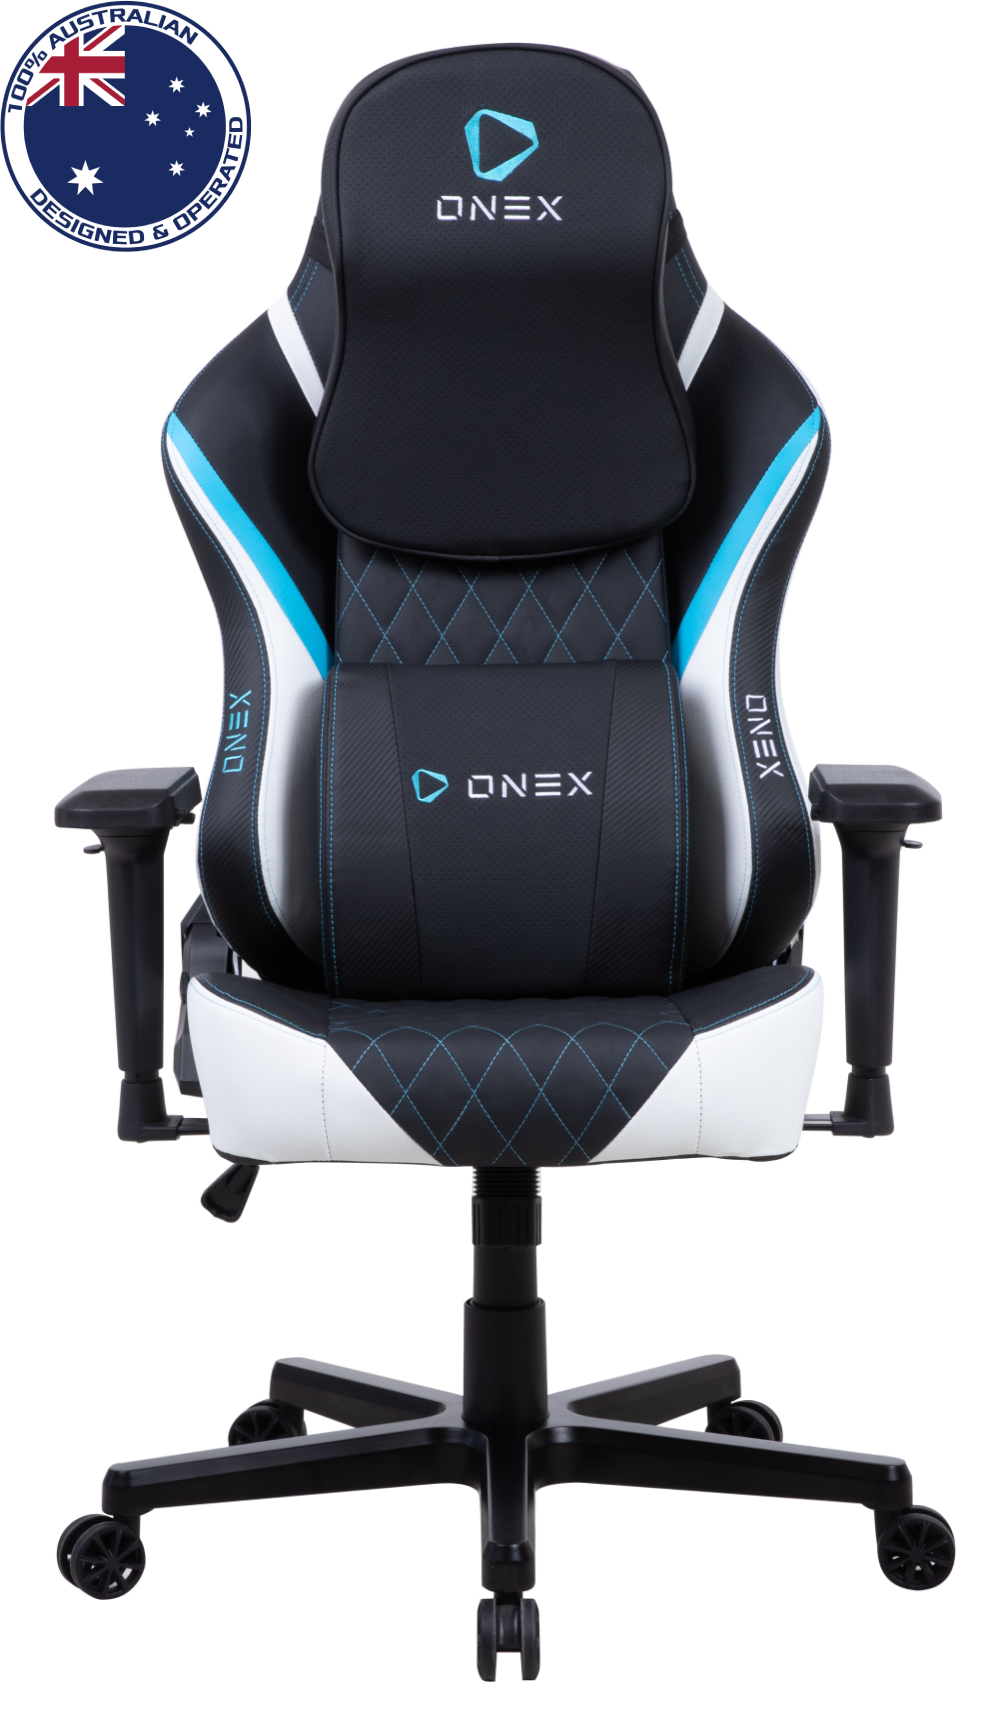  ONEX-FX8 Gaming /Office Chair - Black/Blue/White<BR><fONT COLOR='RED'>In-Store Pickup Not Available - Delivery Only (Freight Charges Apply)  